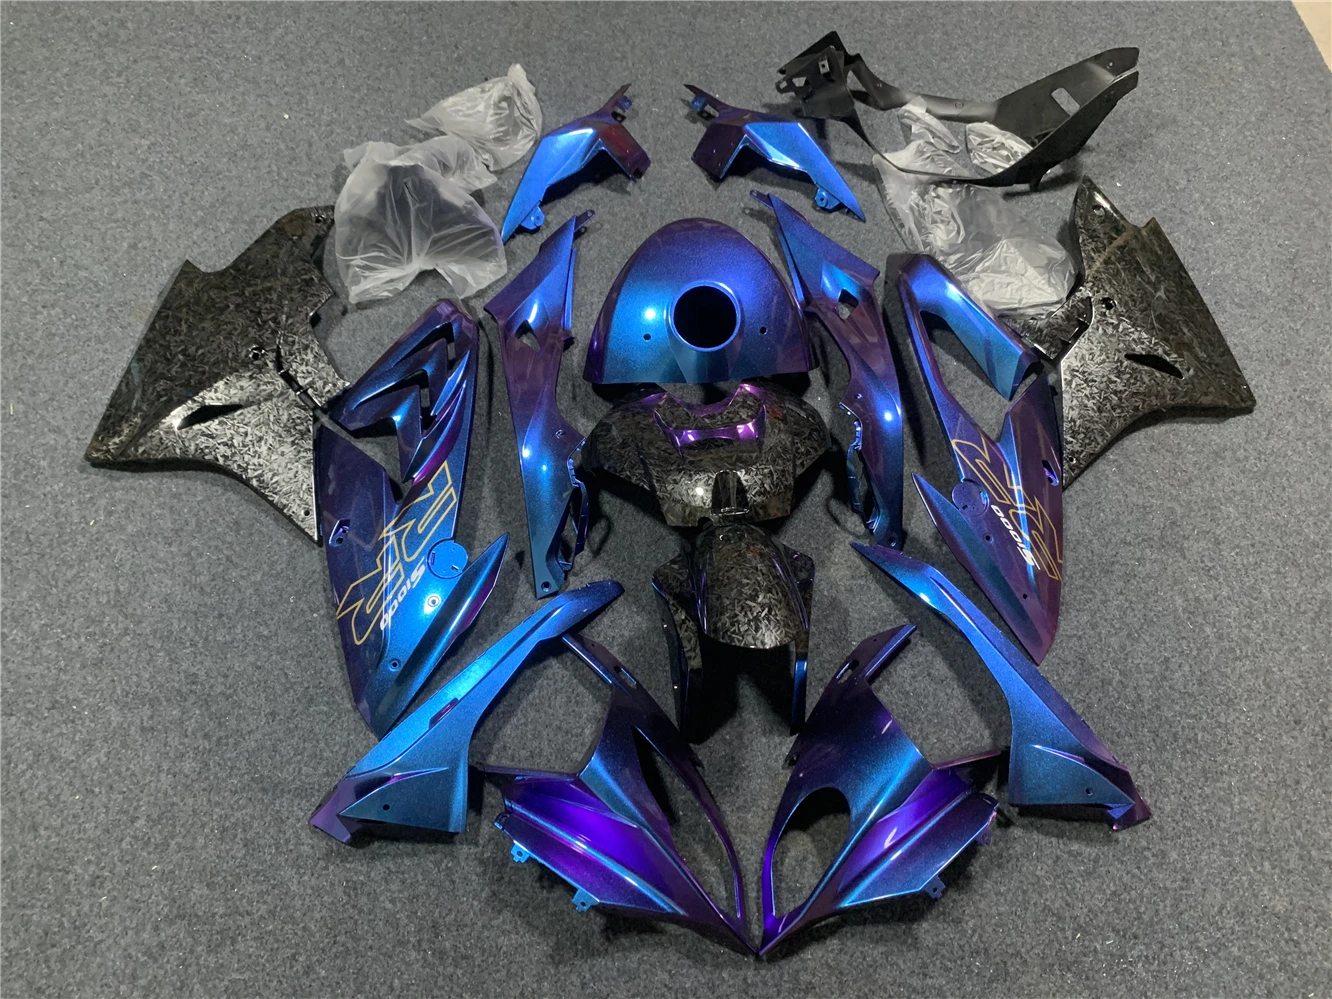 

Motorcycle Fairing Kit for S1000RR 2017 2018 S1000 17 '18 Fairing Carbon fiber pattern paint blue purple motorcycle shell